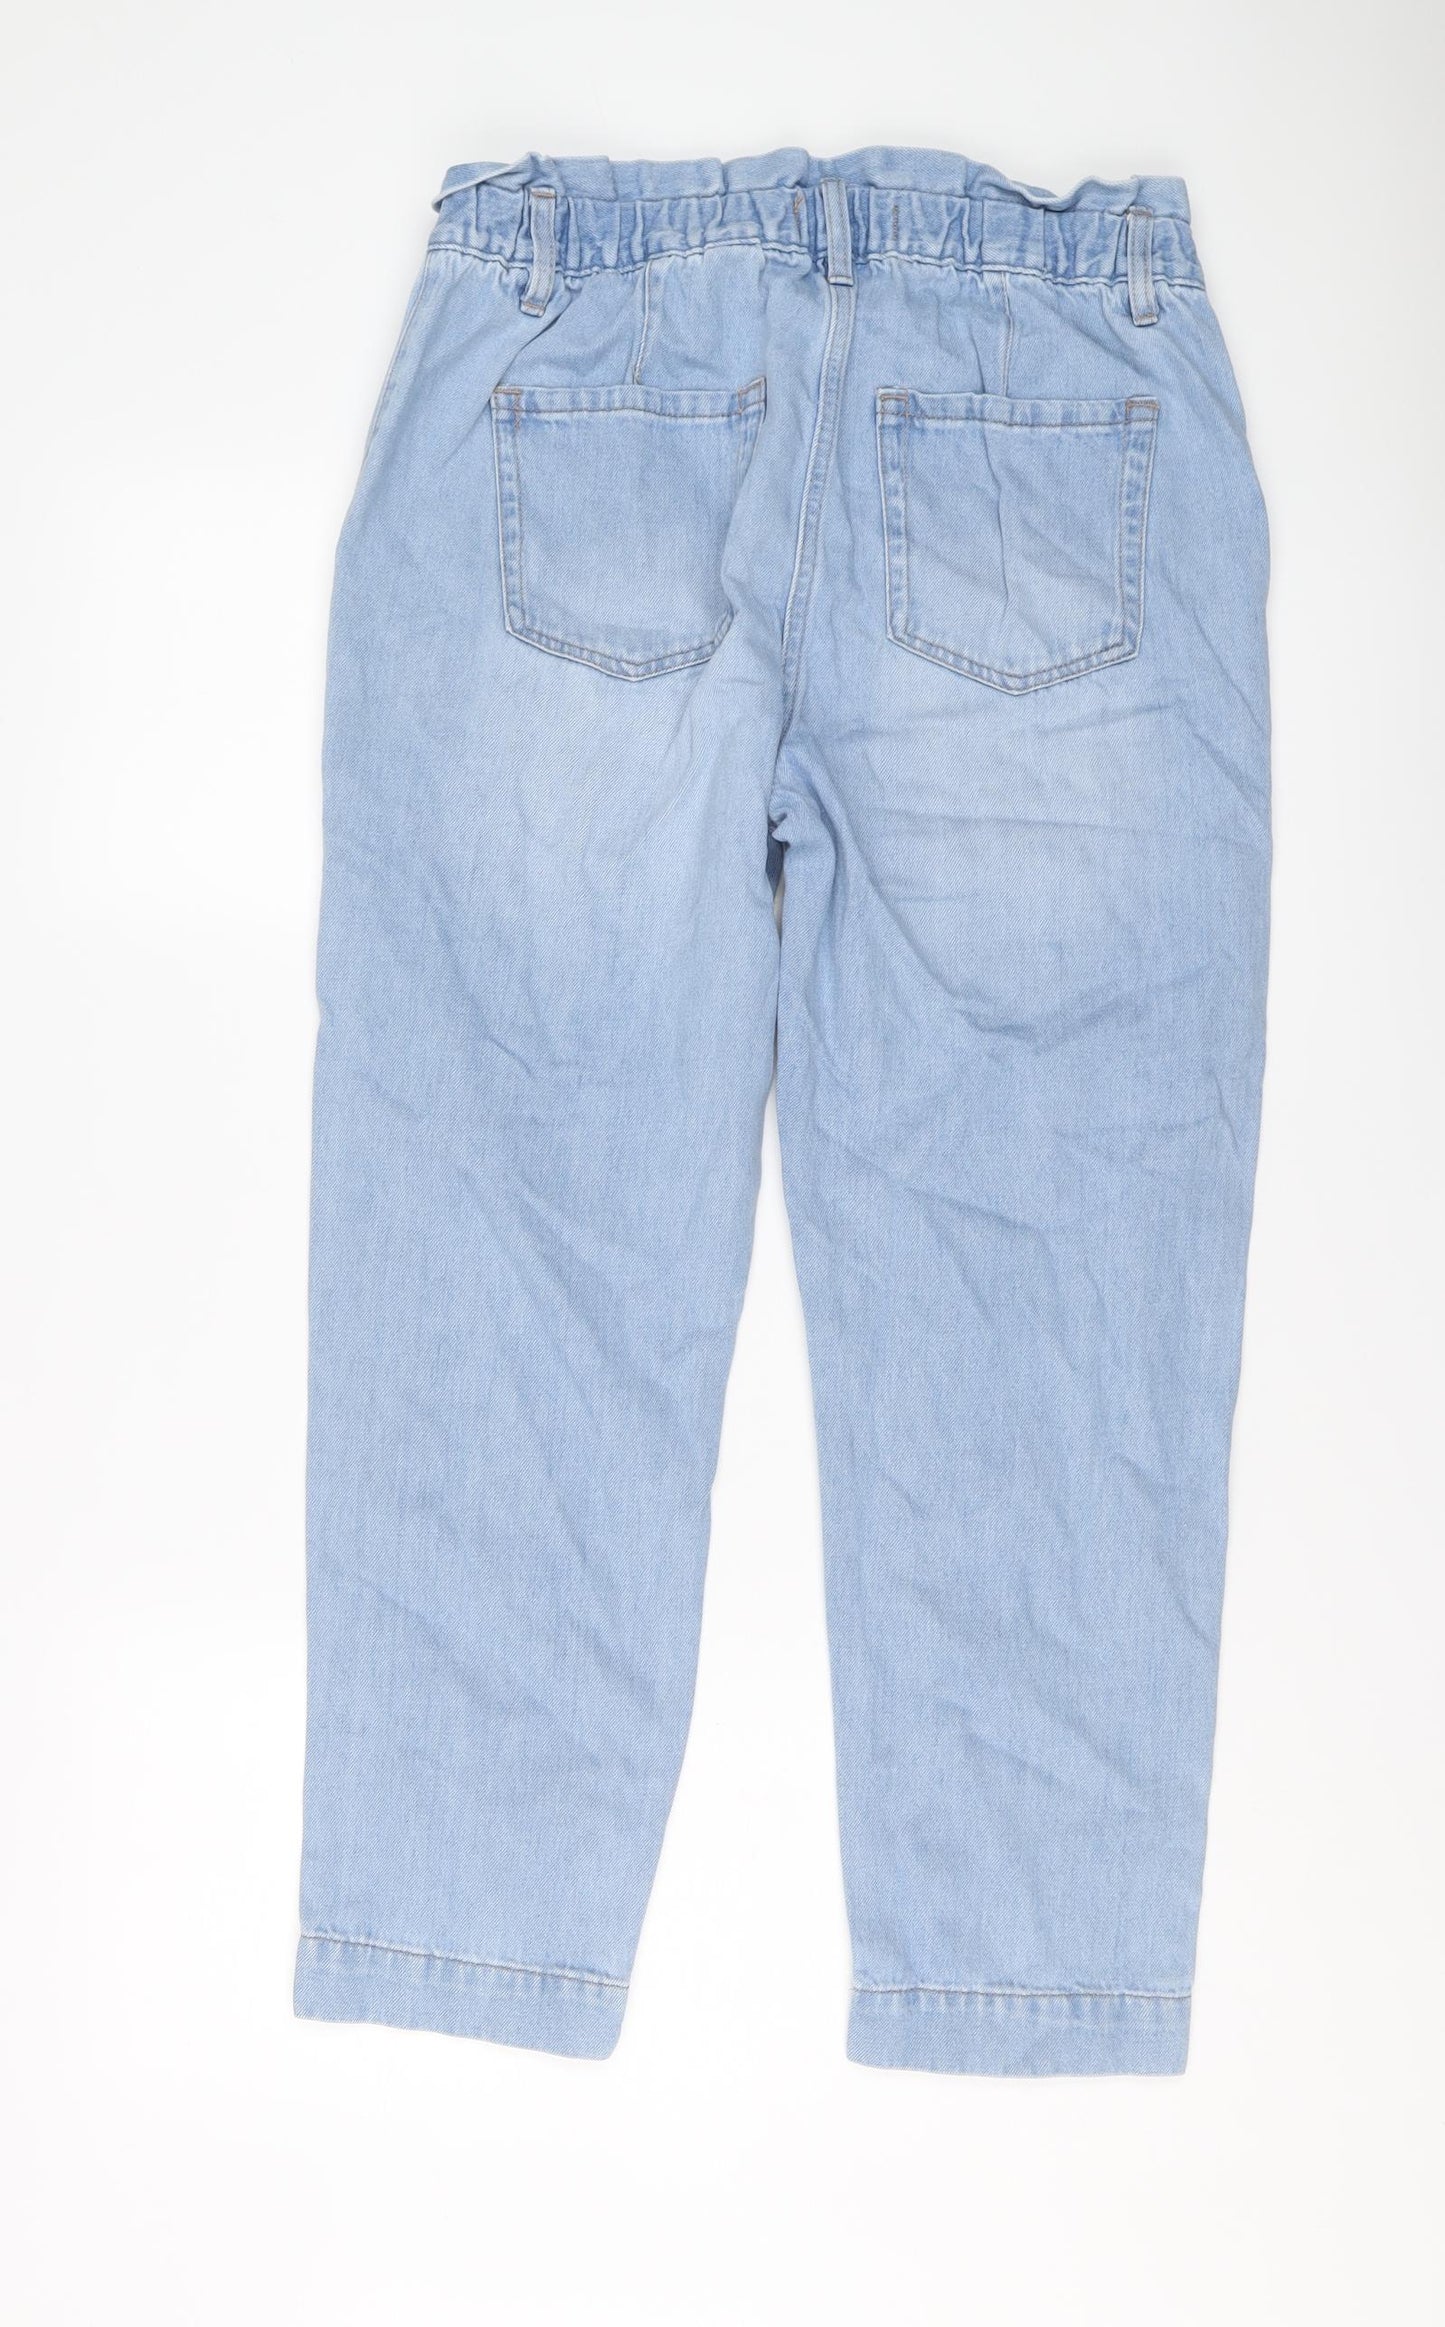 NEXT Womens Blue Cotton Straight Jeans Size 12 L26 in Regular Button